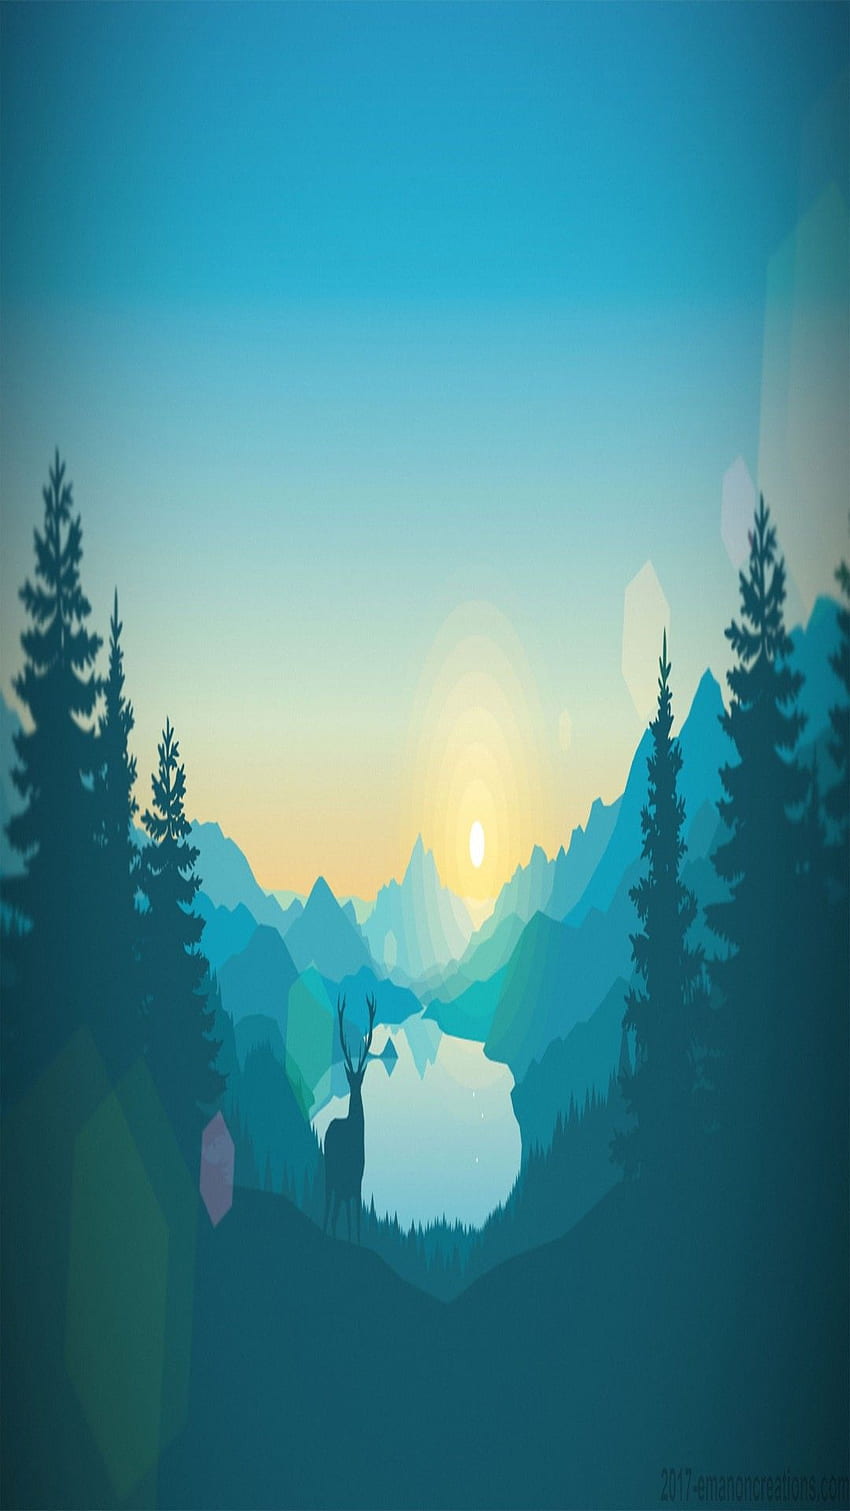 Minimalist Forest Night Wallpaper for Pc